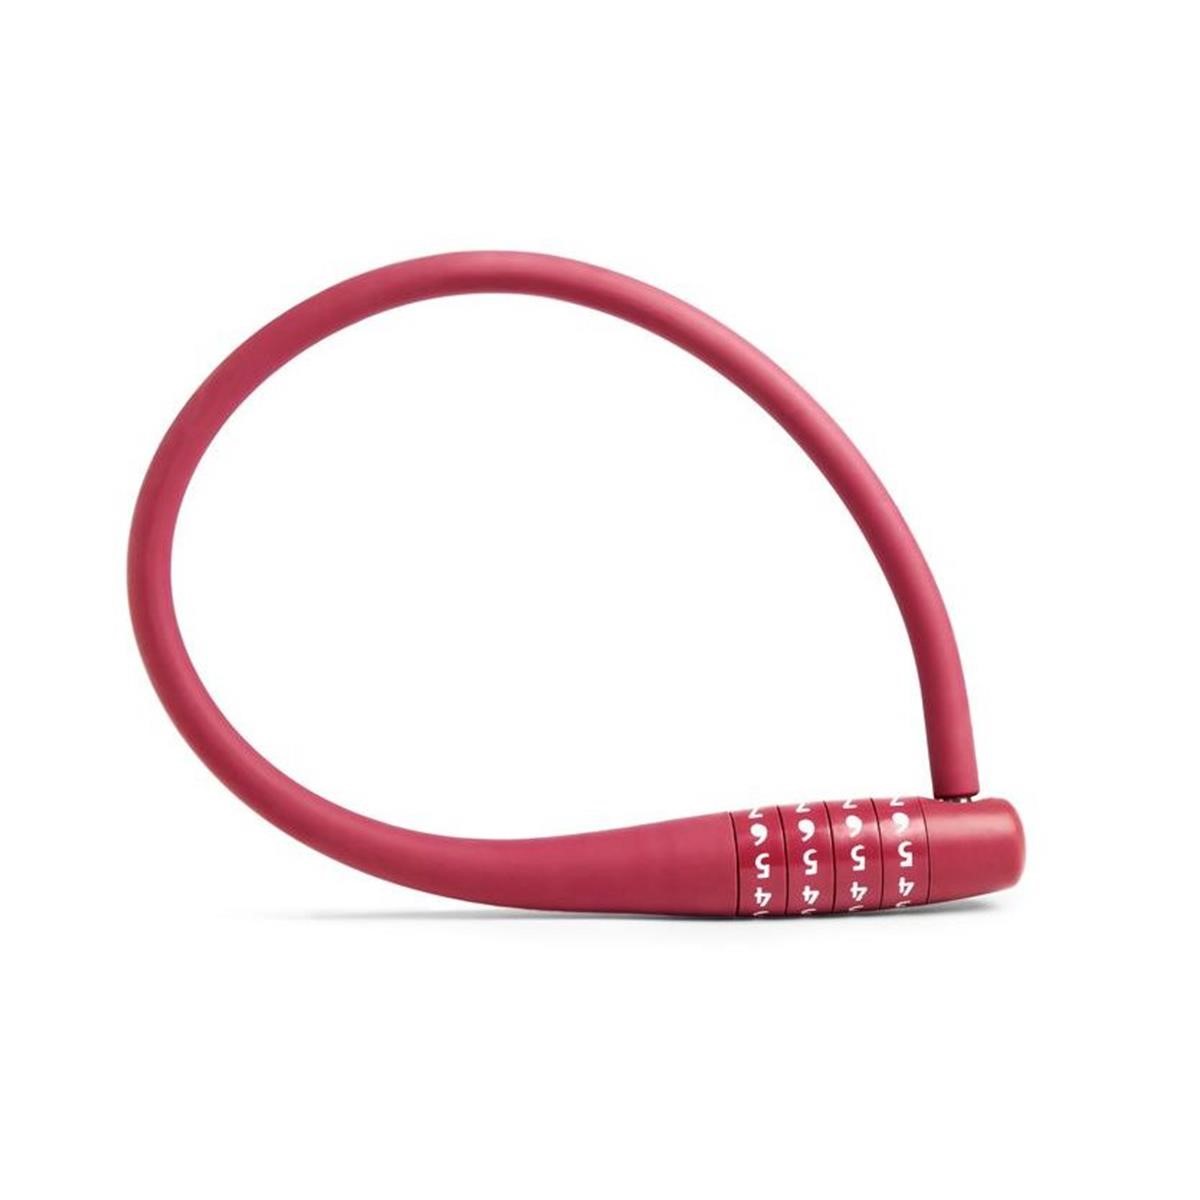 Knog Combination Lock Party Combo Red